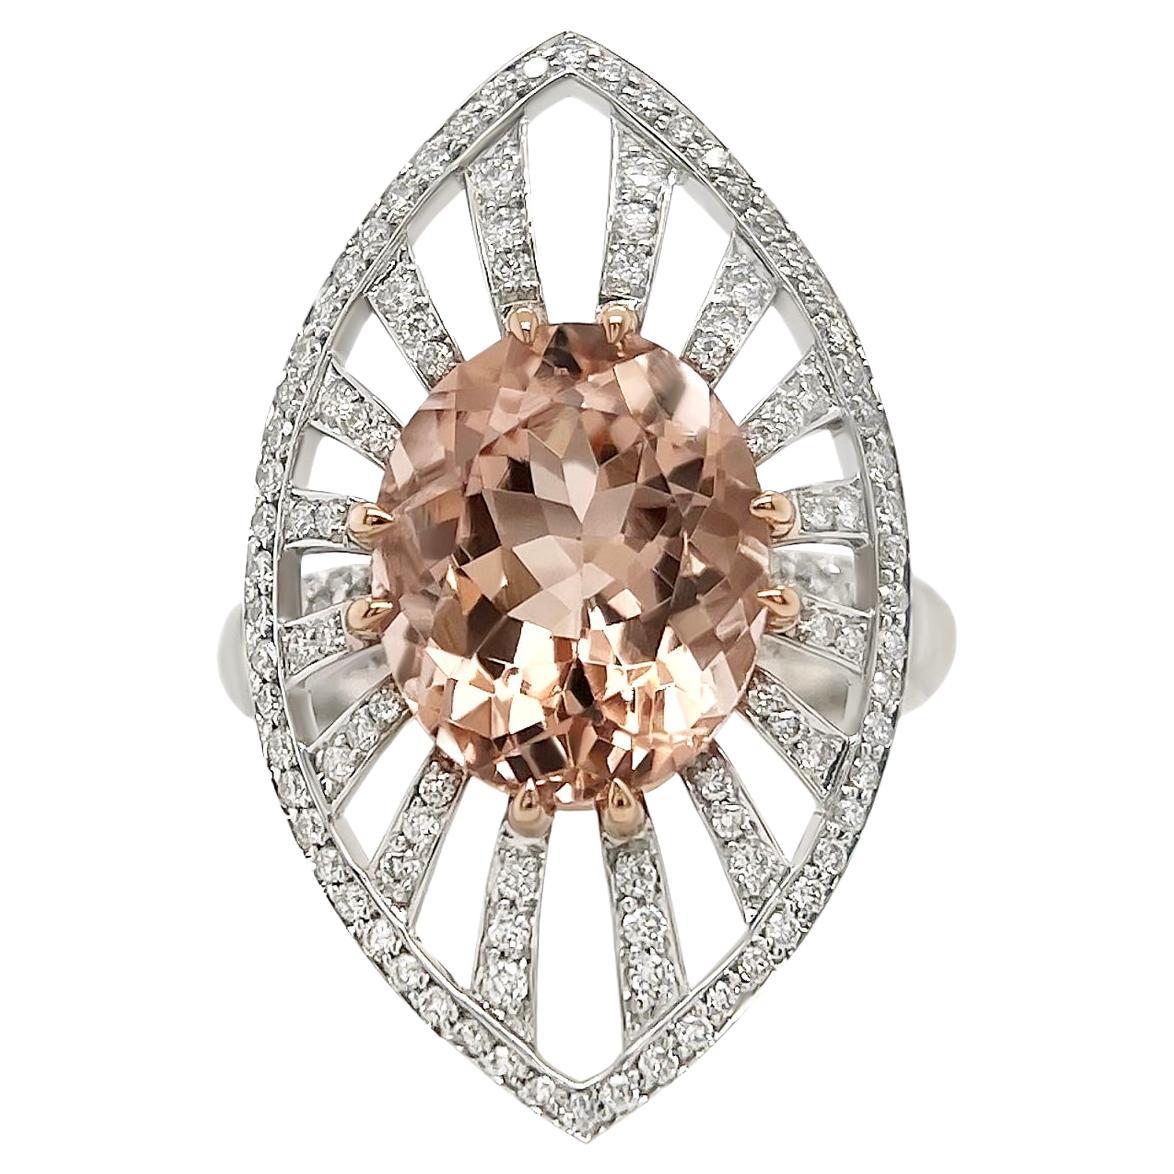 4.70cts Natural Peach Morganite and Diamond Ring in 18k White Gold